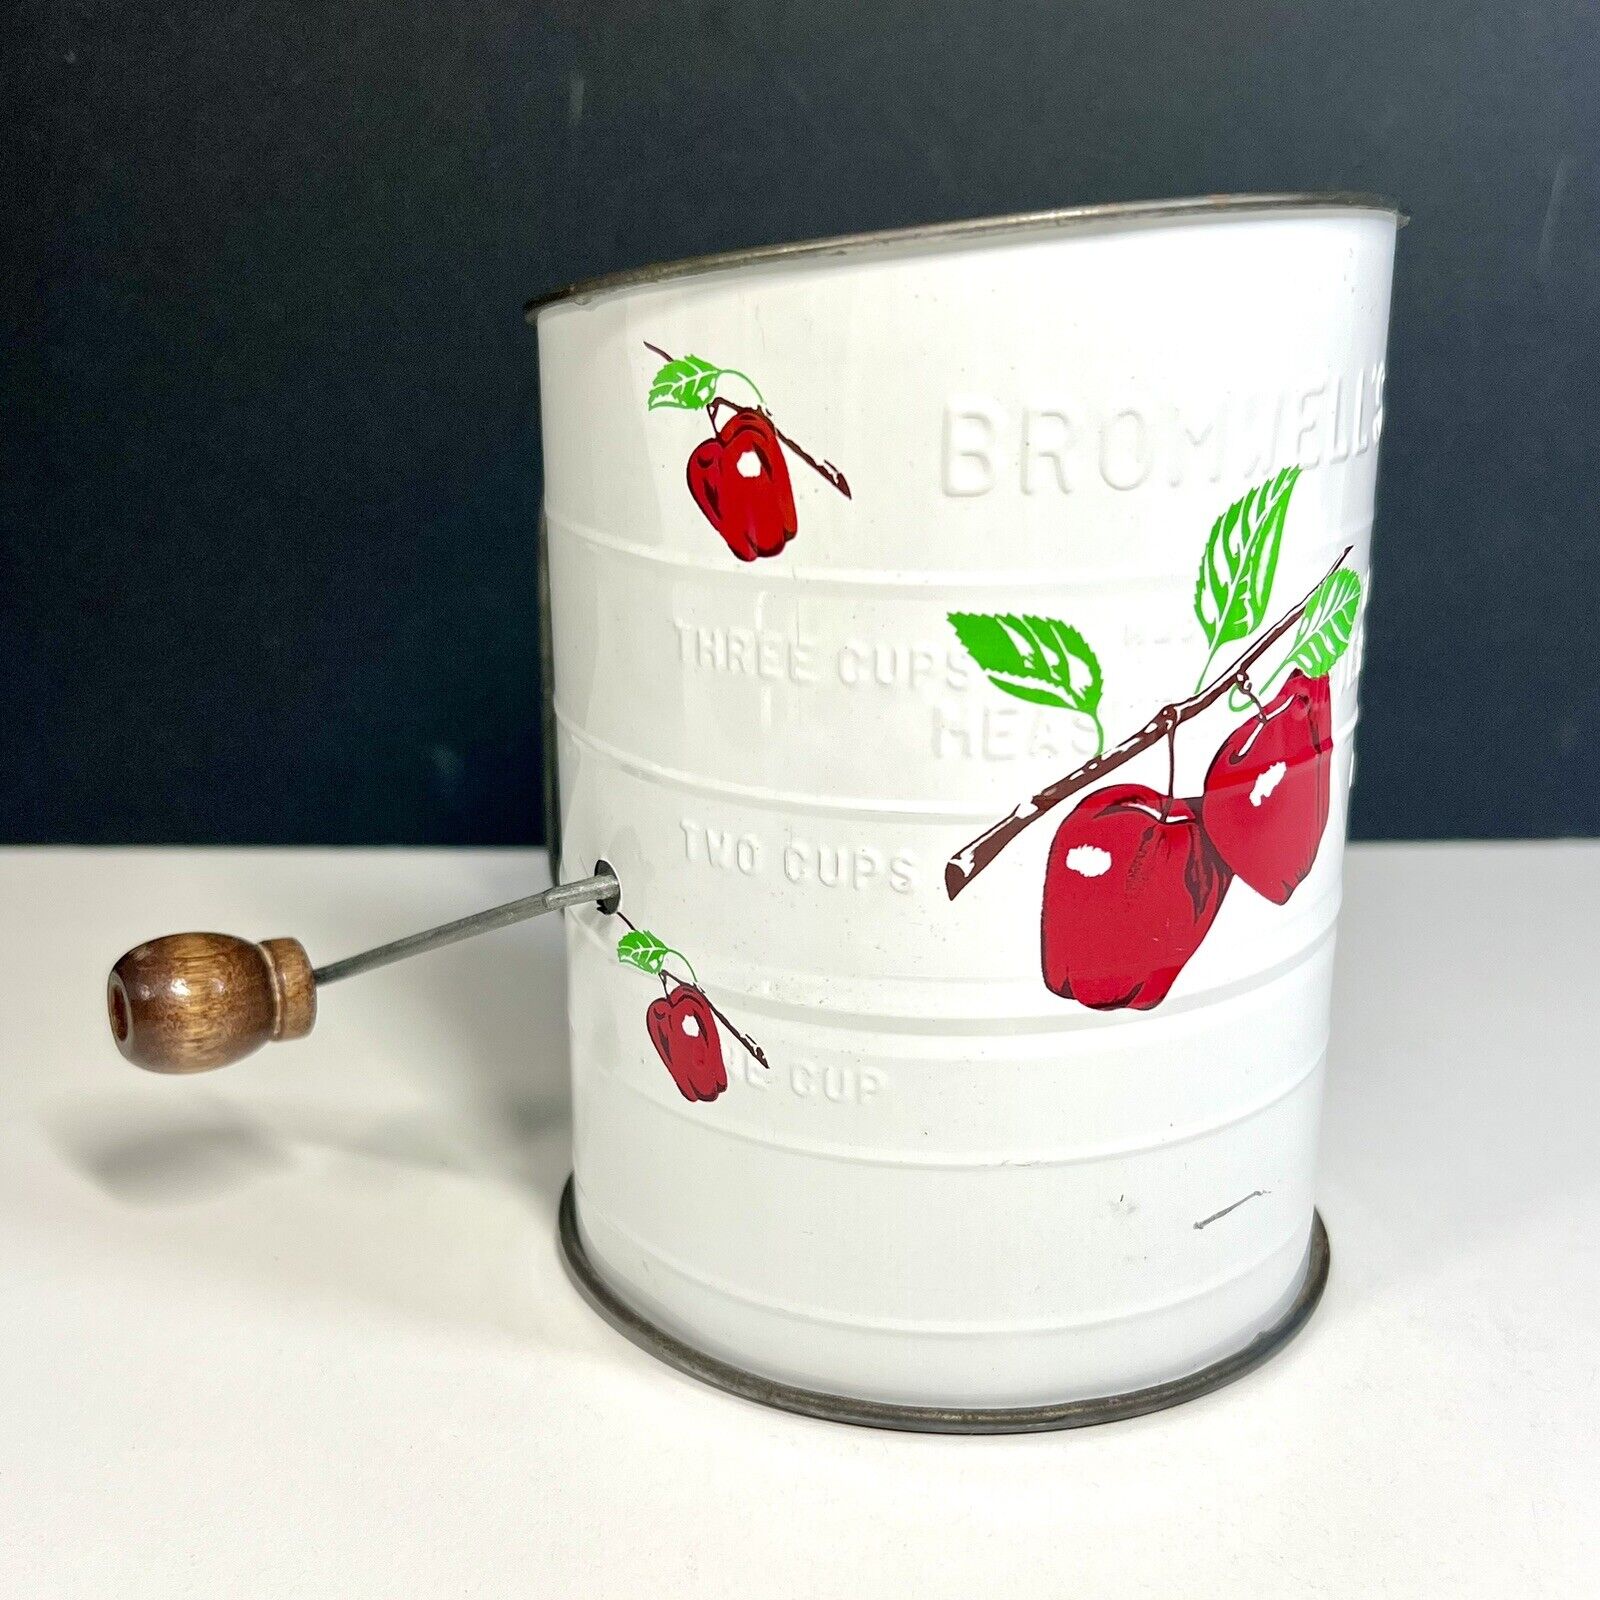 Vintage Bromwell’s 3-Cup Metal Flour Sifter Apple Design Measuring Made in USA